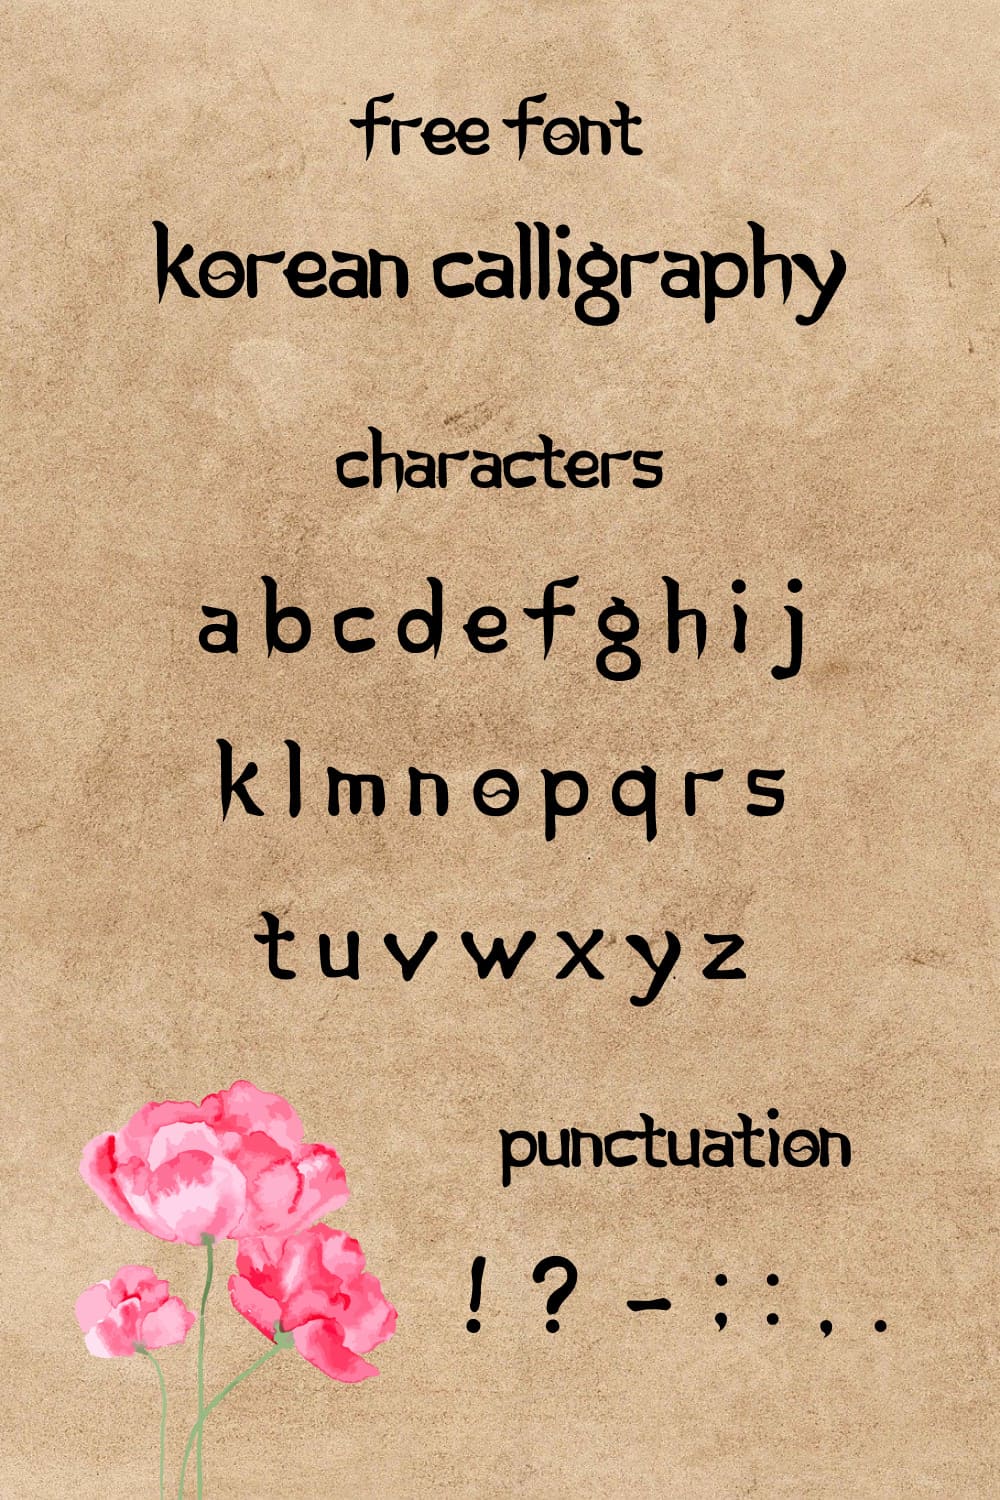 Free korean font Pinterest Collage Image with Characters and Punctuation.